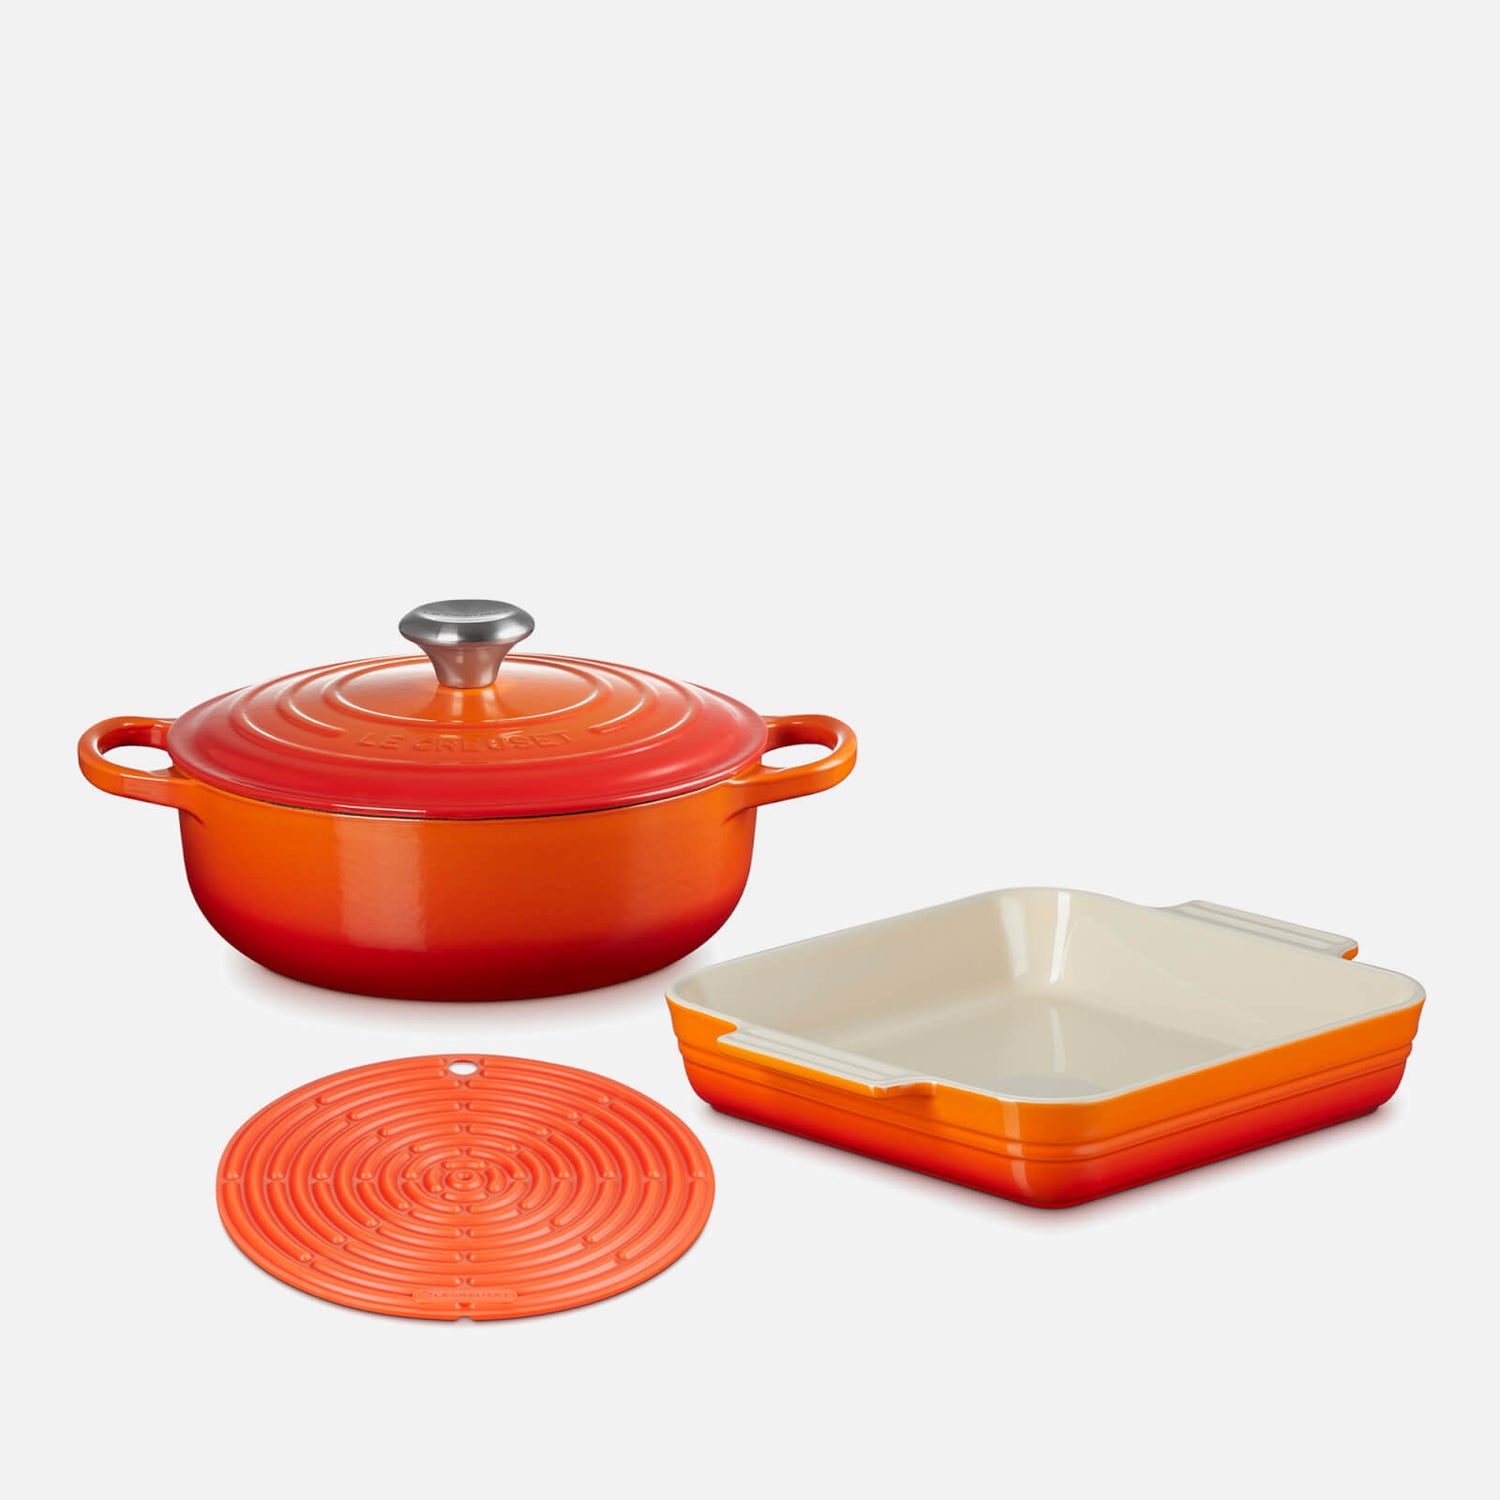 Le Creuset Mixed Set - 3 Pieces - Cast Iron Sauteuse, Stoneware Square Dish, Silicone Cool Tool - Volcanic